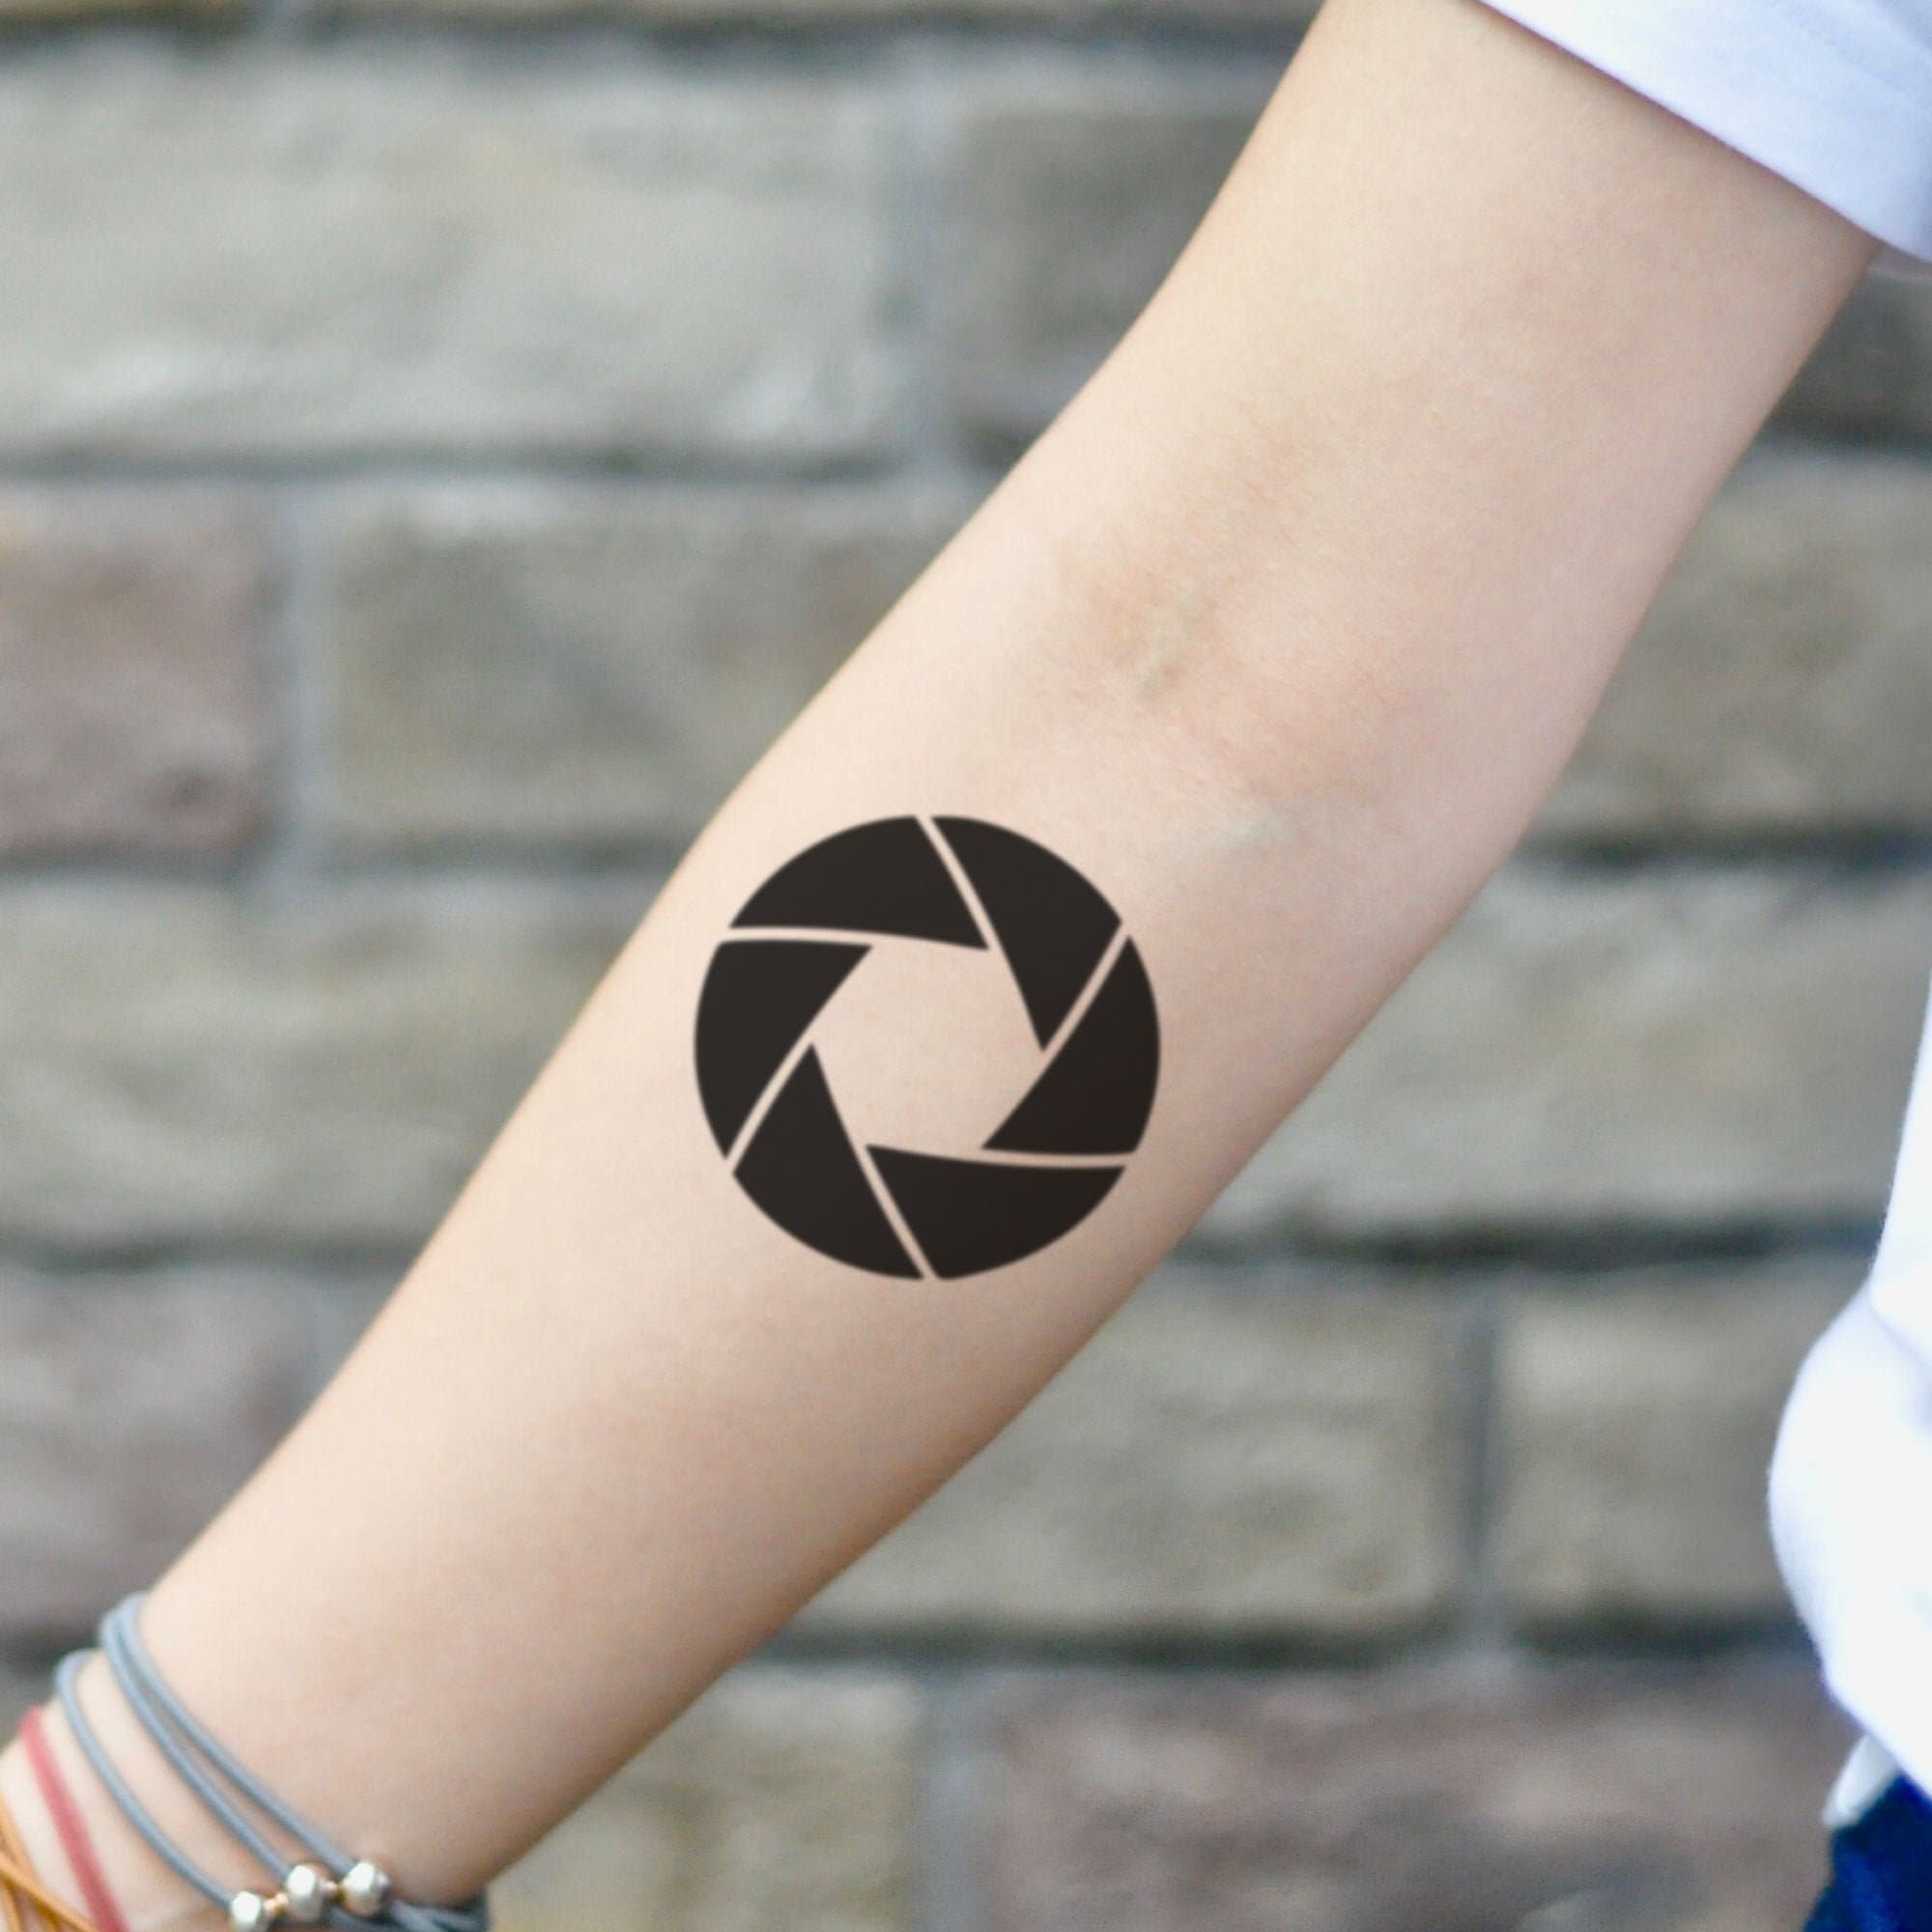 Buy Aperture Temporary Tattoo Sticker set of 2 Online in India - Etsy